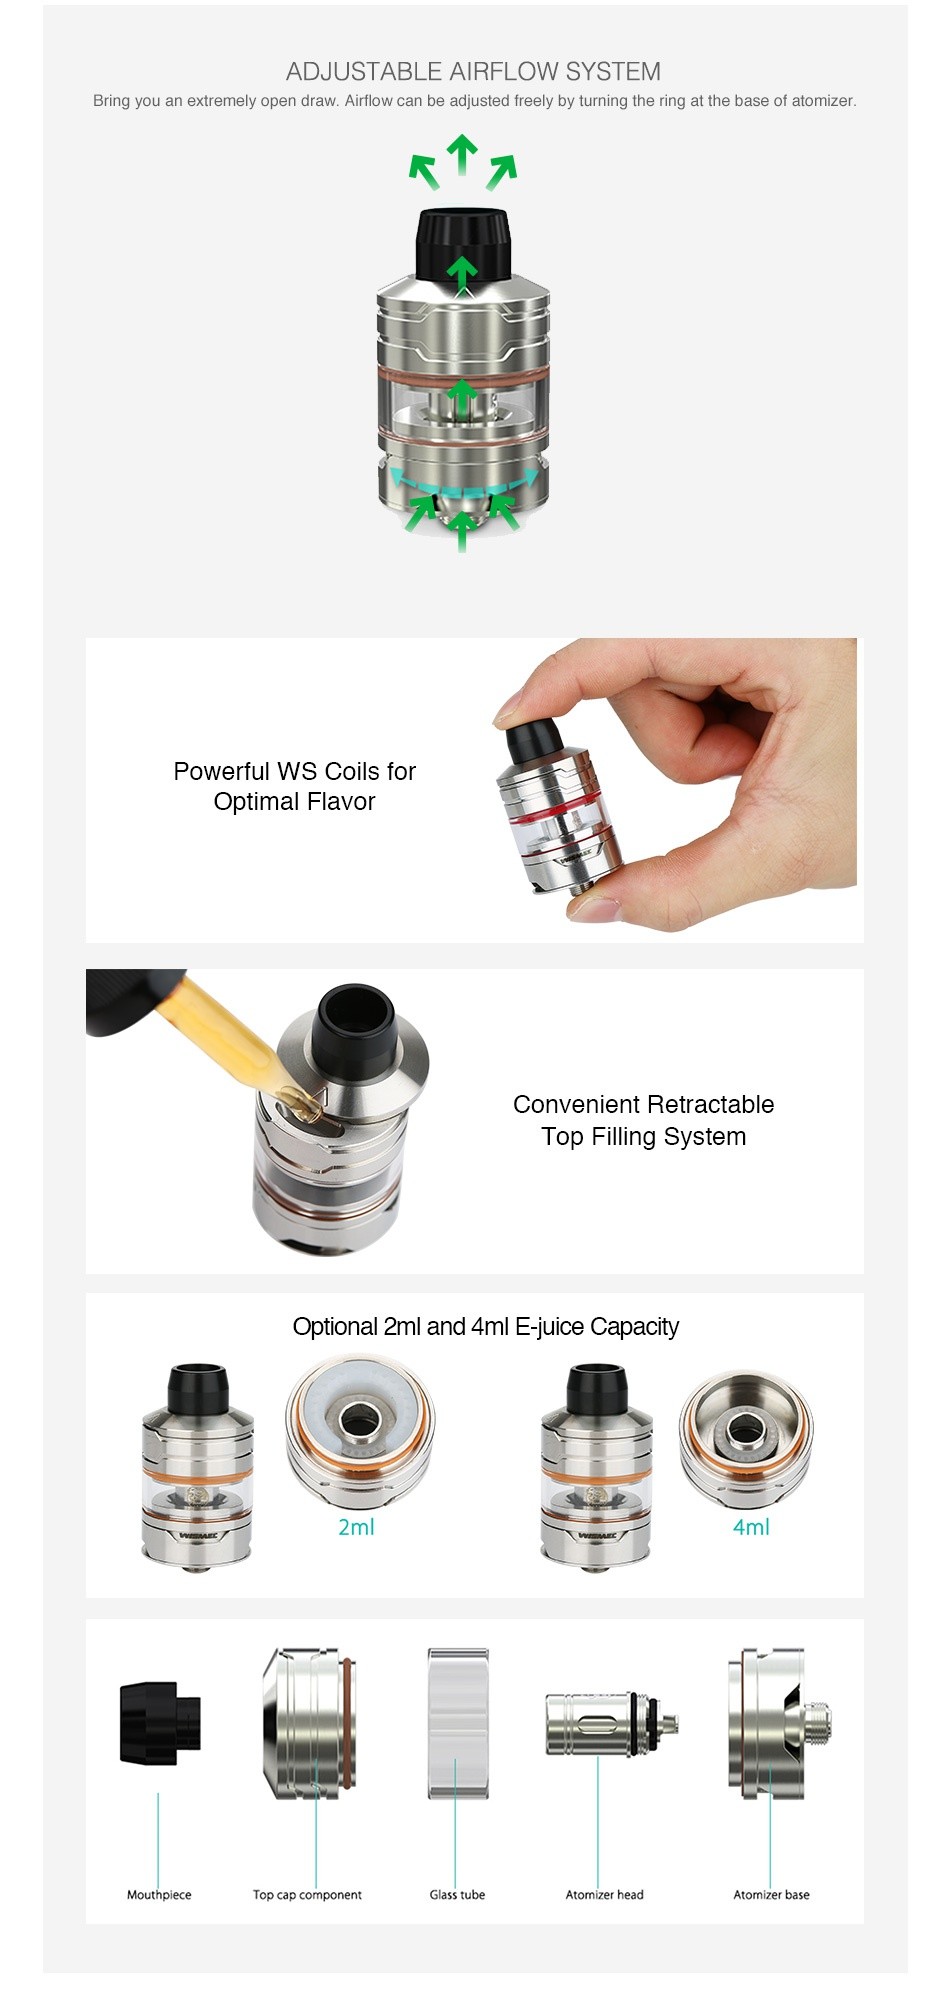 WISMEC Divider Atomizer 2ml/4ml ADJUSTABLE AIRFLOW SYSTEM Bring you an extremely open draw  Airflow can be adjusted freely by turning the ring at the base of atomizer   R   Powerful ws coils for Optimal flavor Convenient retractable Top Filling System Optional 2ml and 4ml E juice Capacity 2ml 4ml Mouthpiece Top cap compone Glass tube Atomizer head Atomizer base